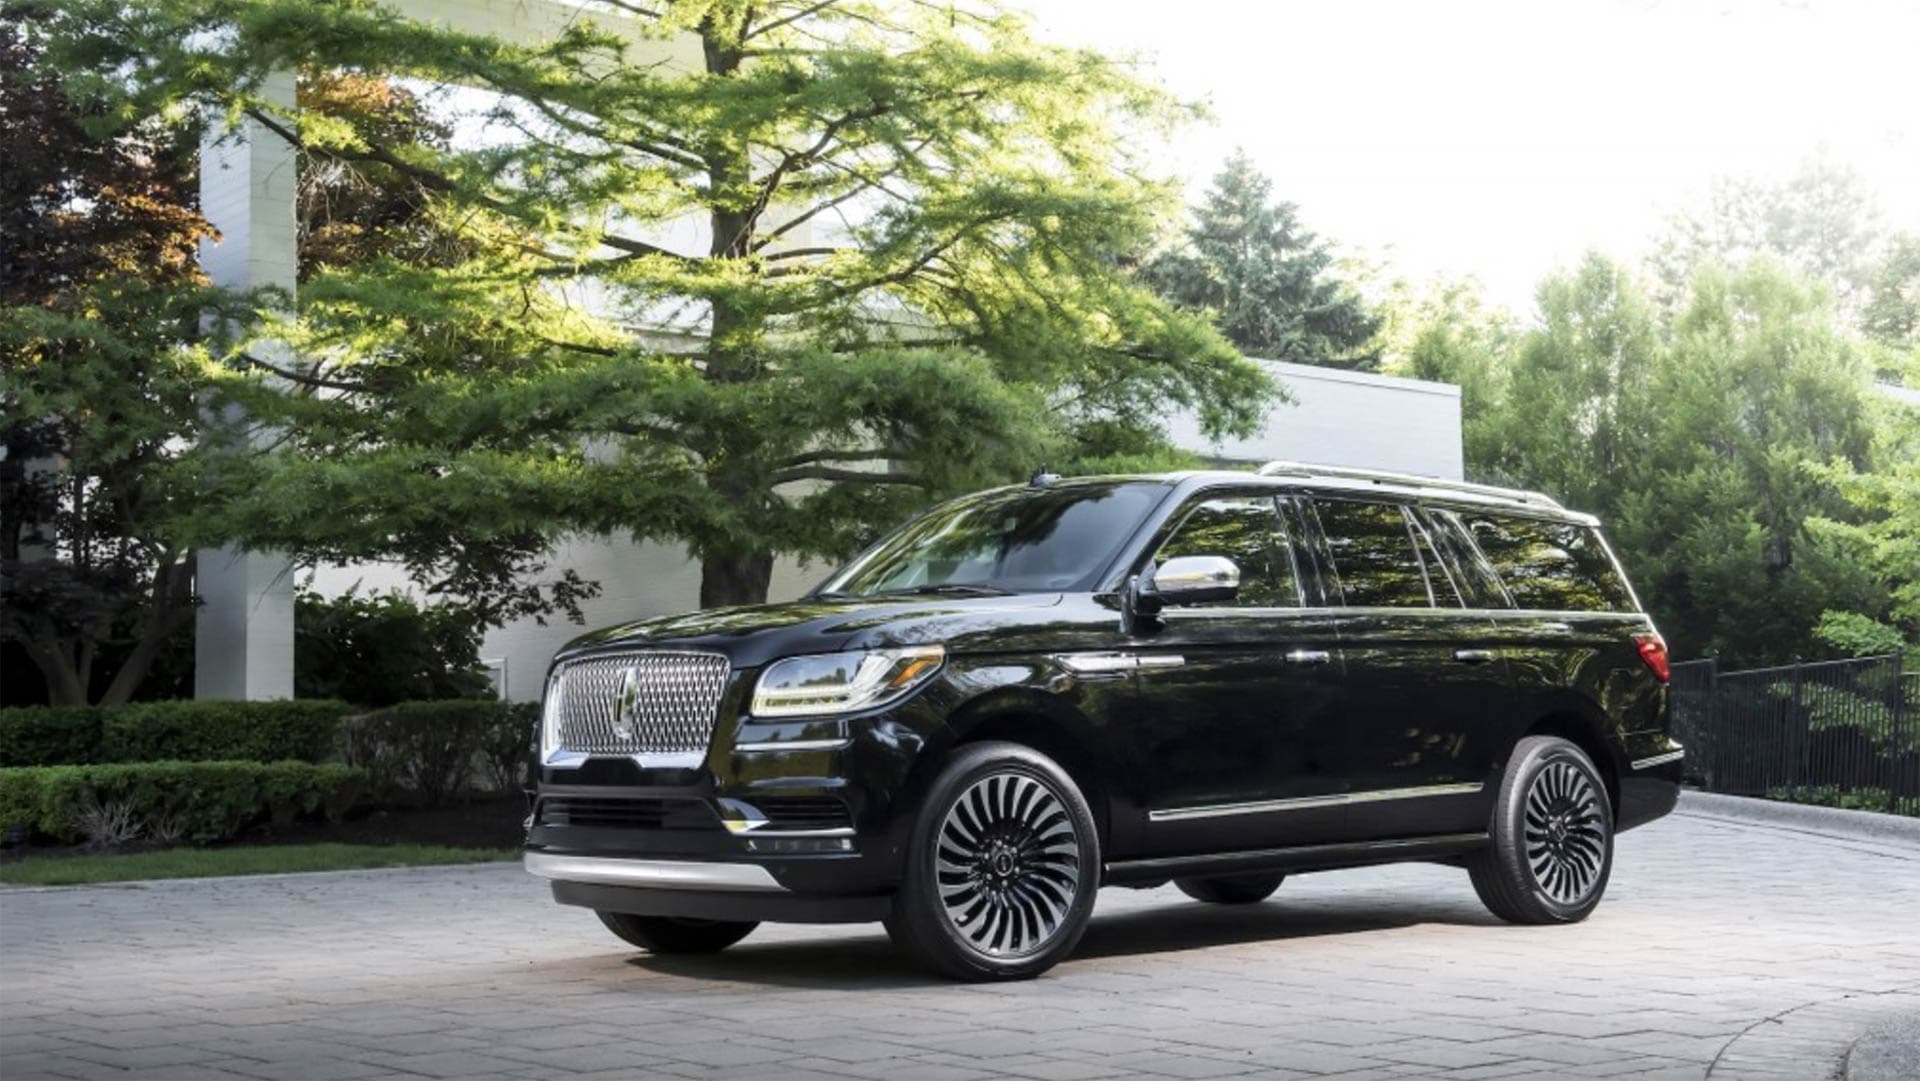 The 2018 Lincoln Navigator Offers a Boatload of Luxury for $72,055